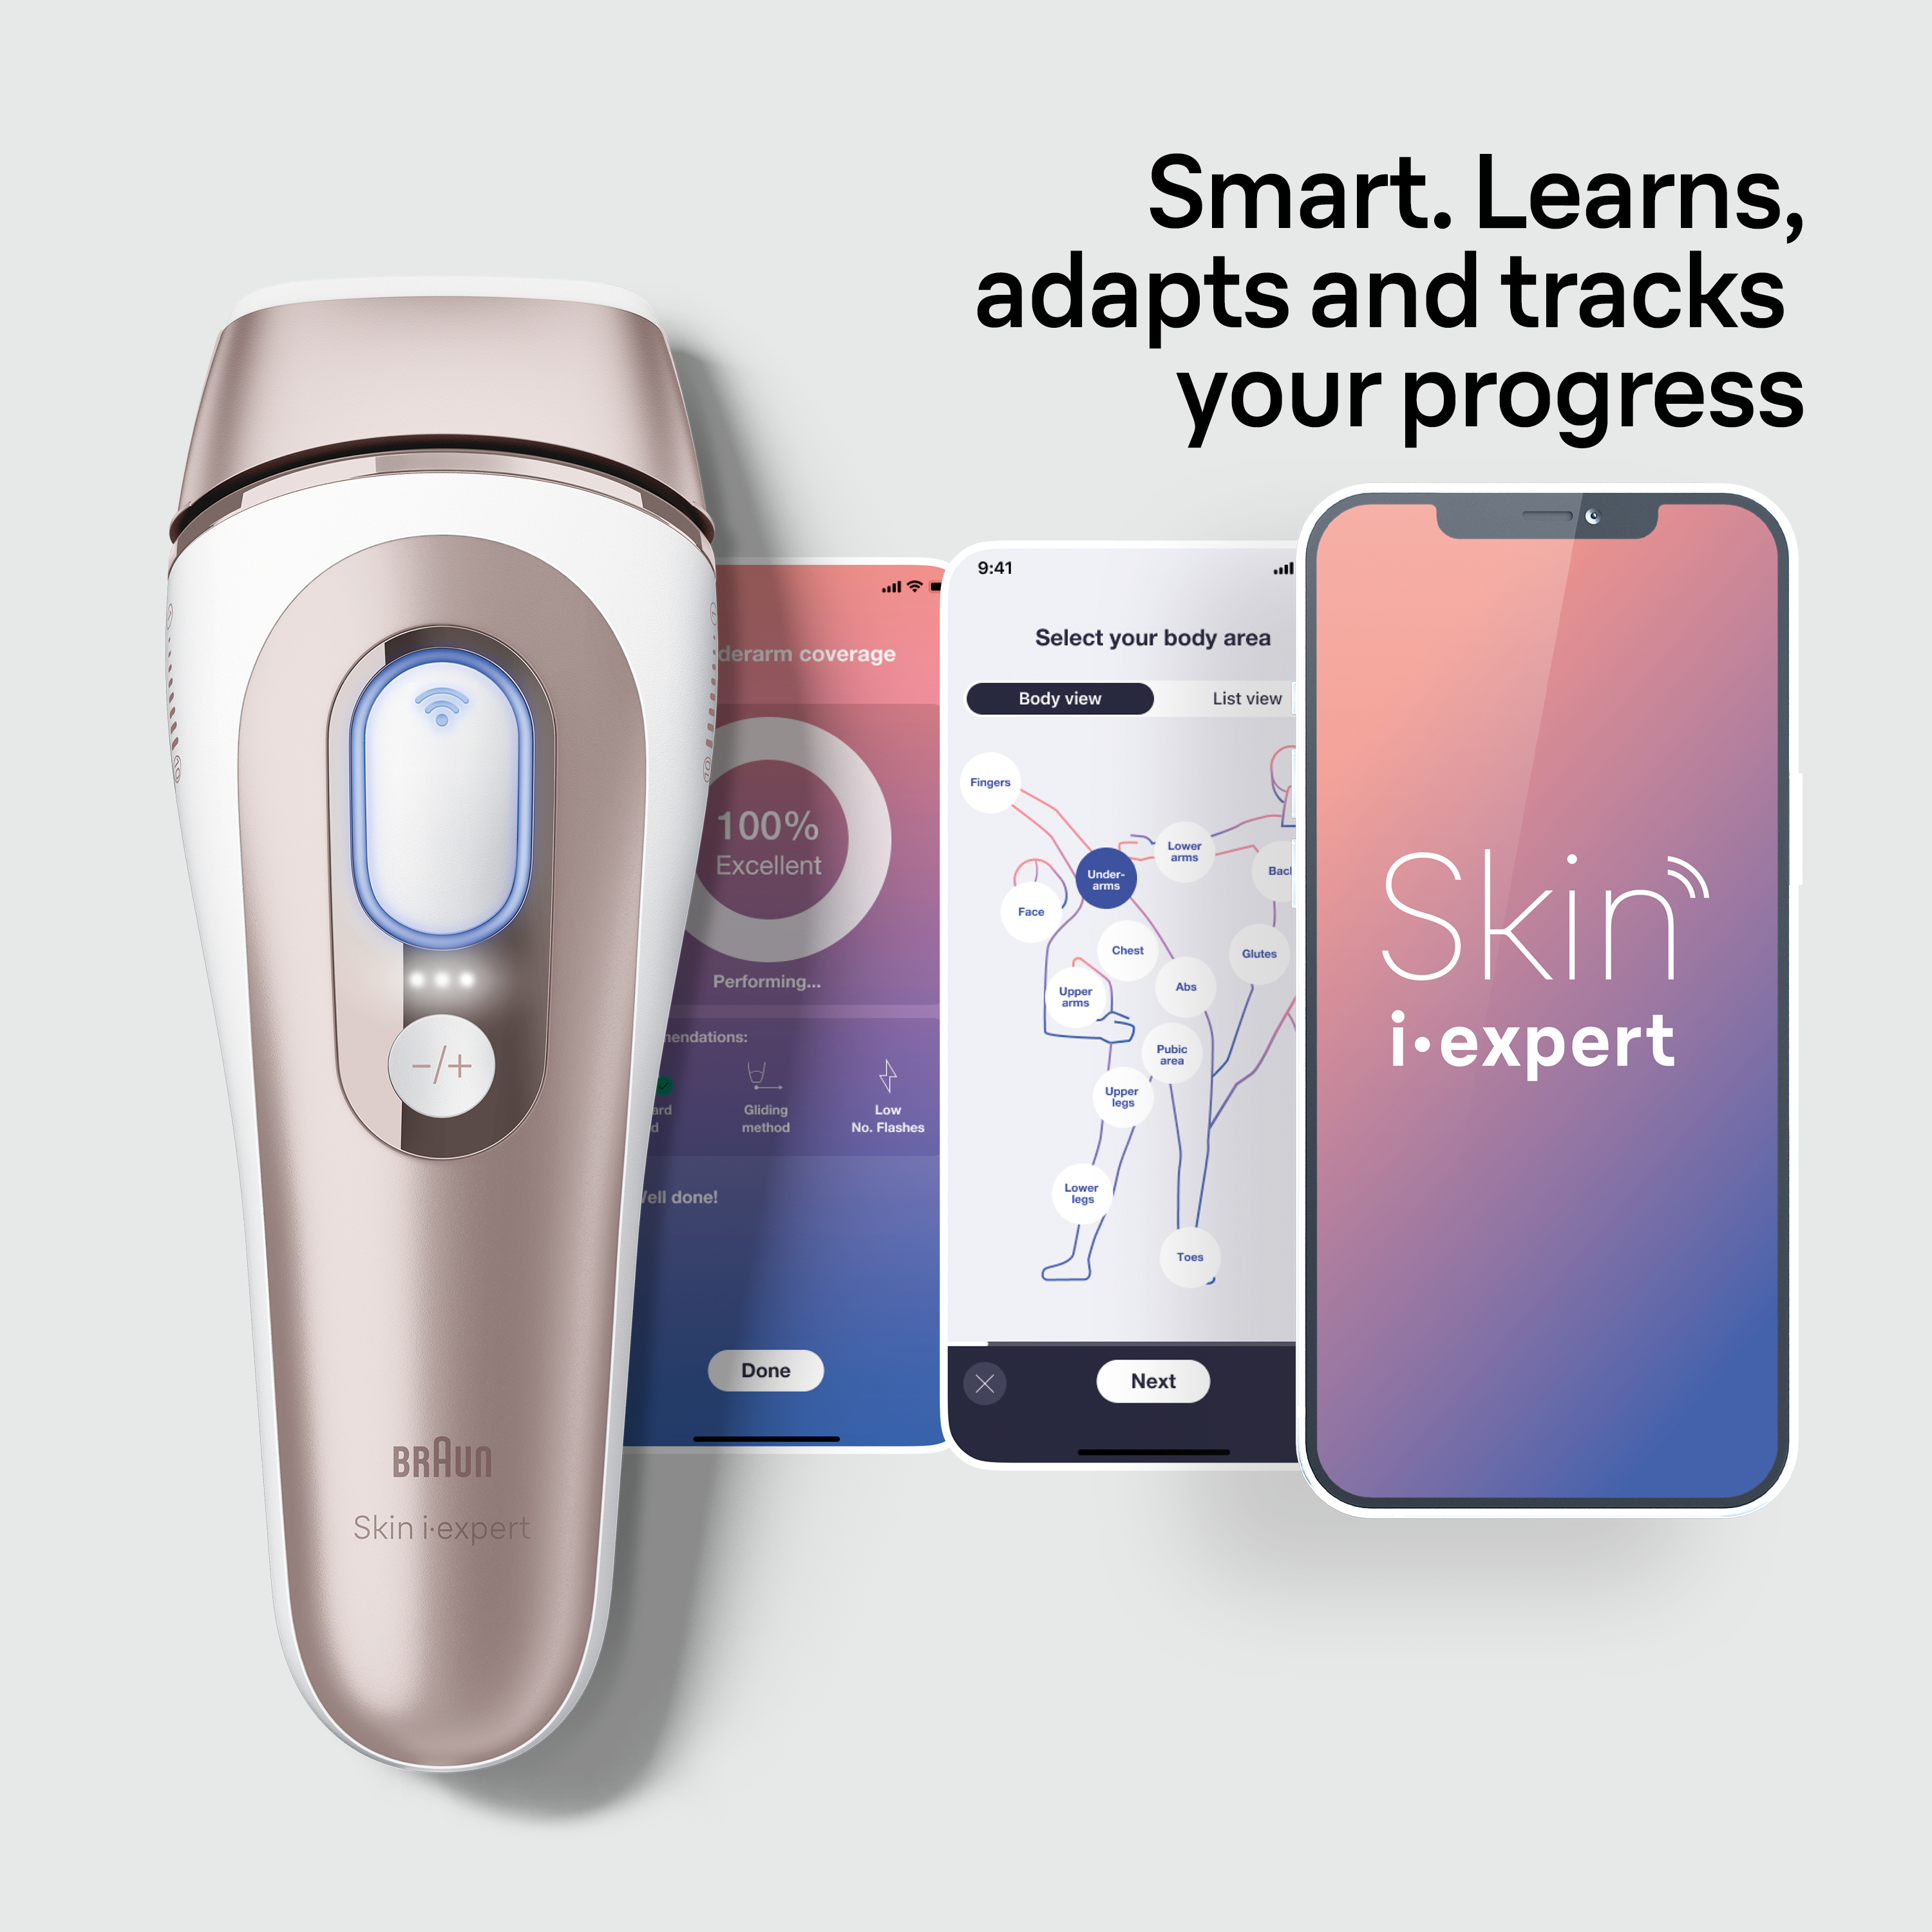 Braun Launches the World's First Smart At-Home IPL System That Learns and  Adapts to Your Skin and Hair to Give You 1 Year of Smooth Skin*